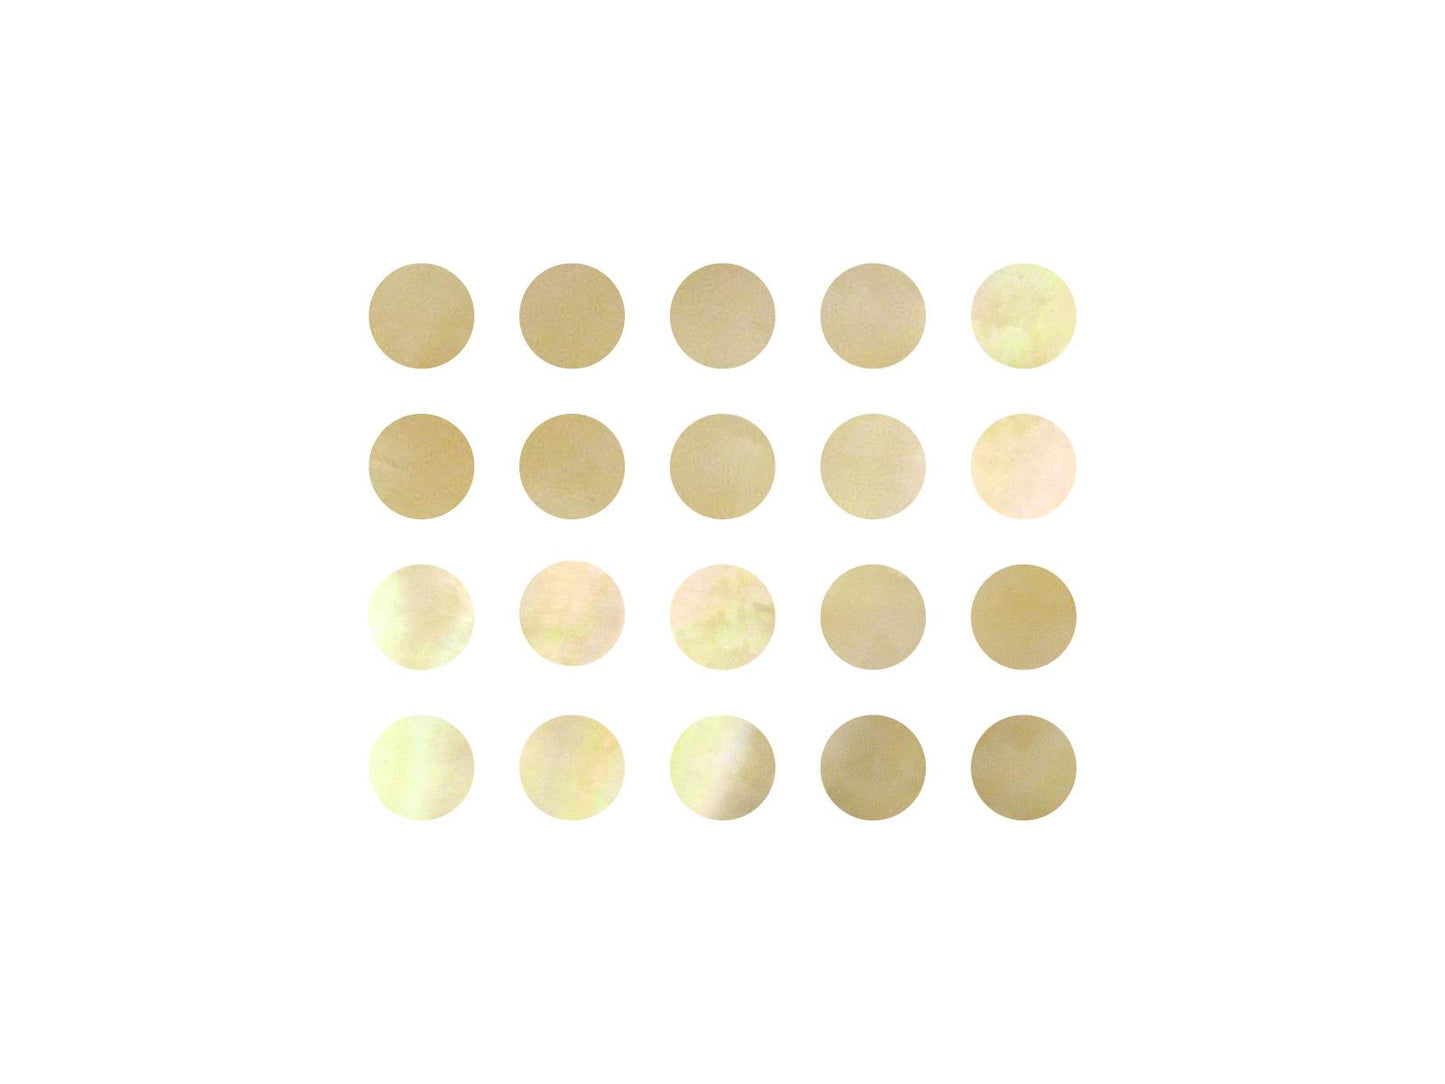 Incudo Gold Pearl Mother of Pearl Dot Inlays - 14mm (0.55"), Pack of 20